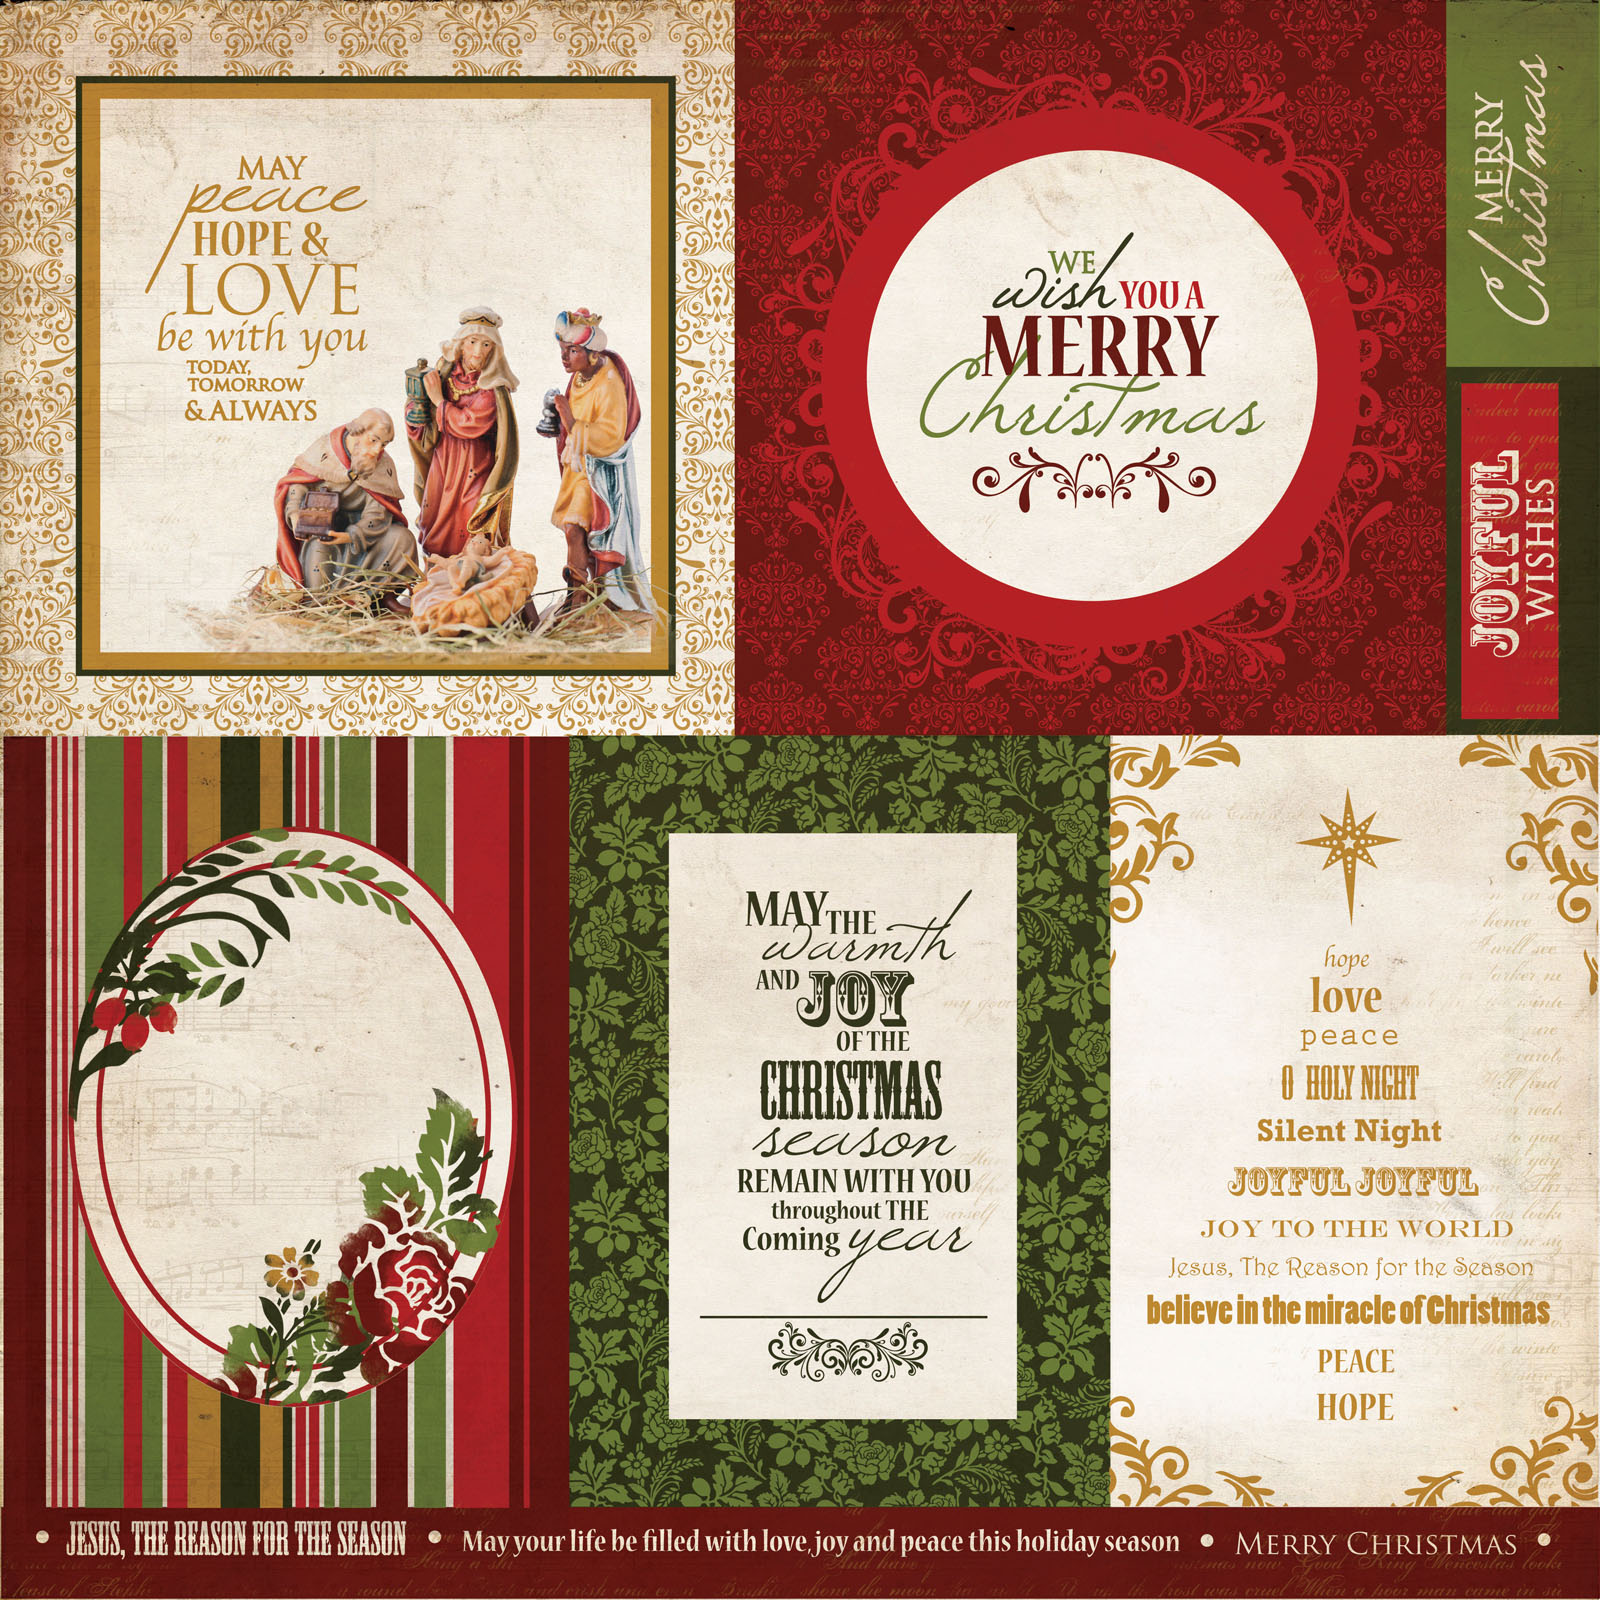 Kaisercraft • Holy night double-sided 12x12" Blessing